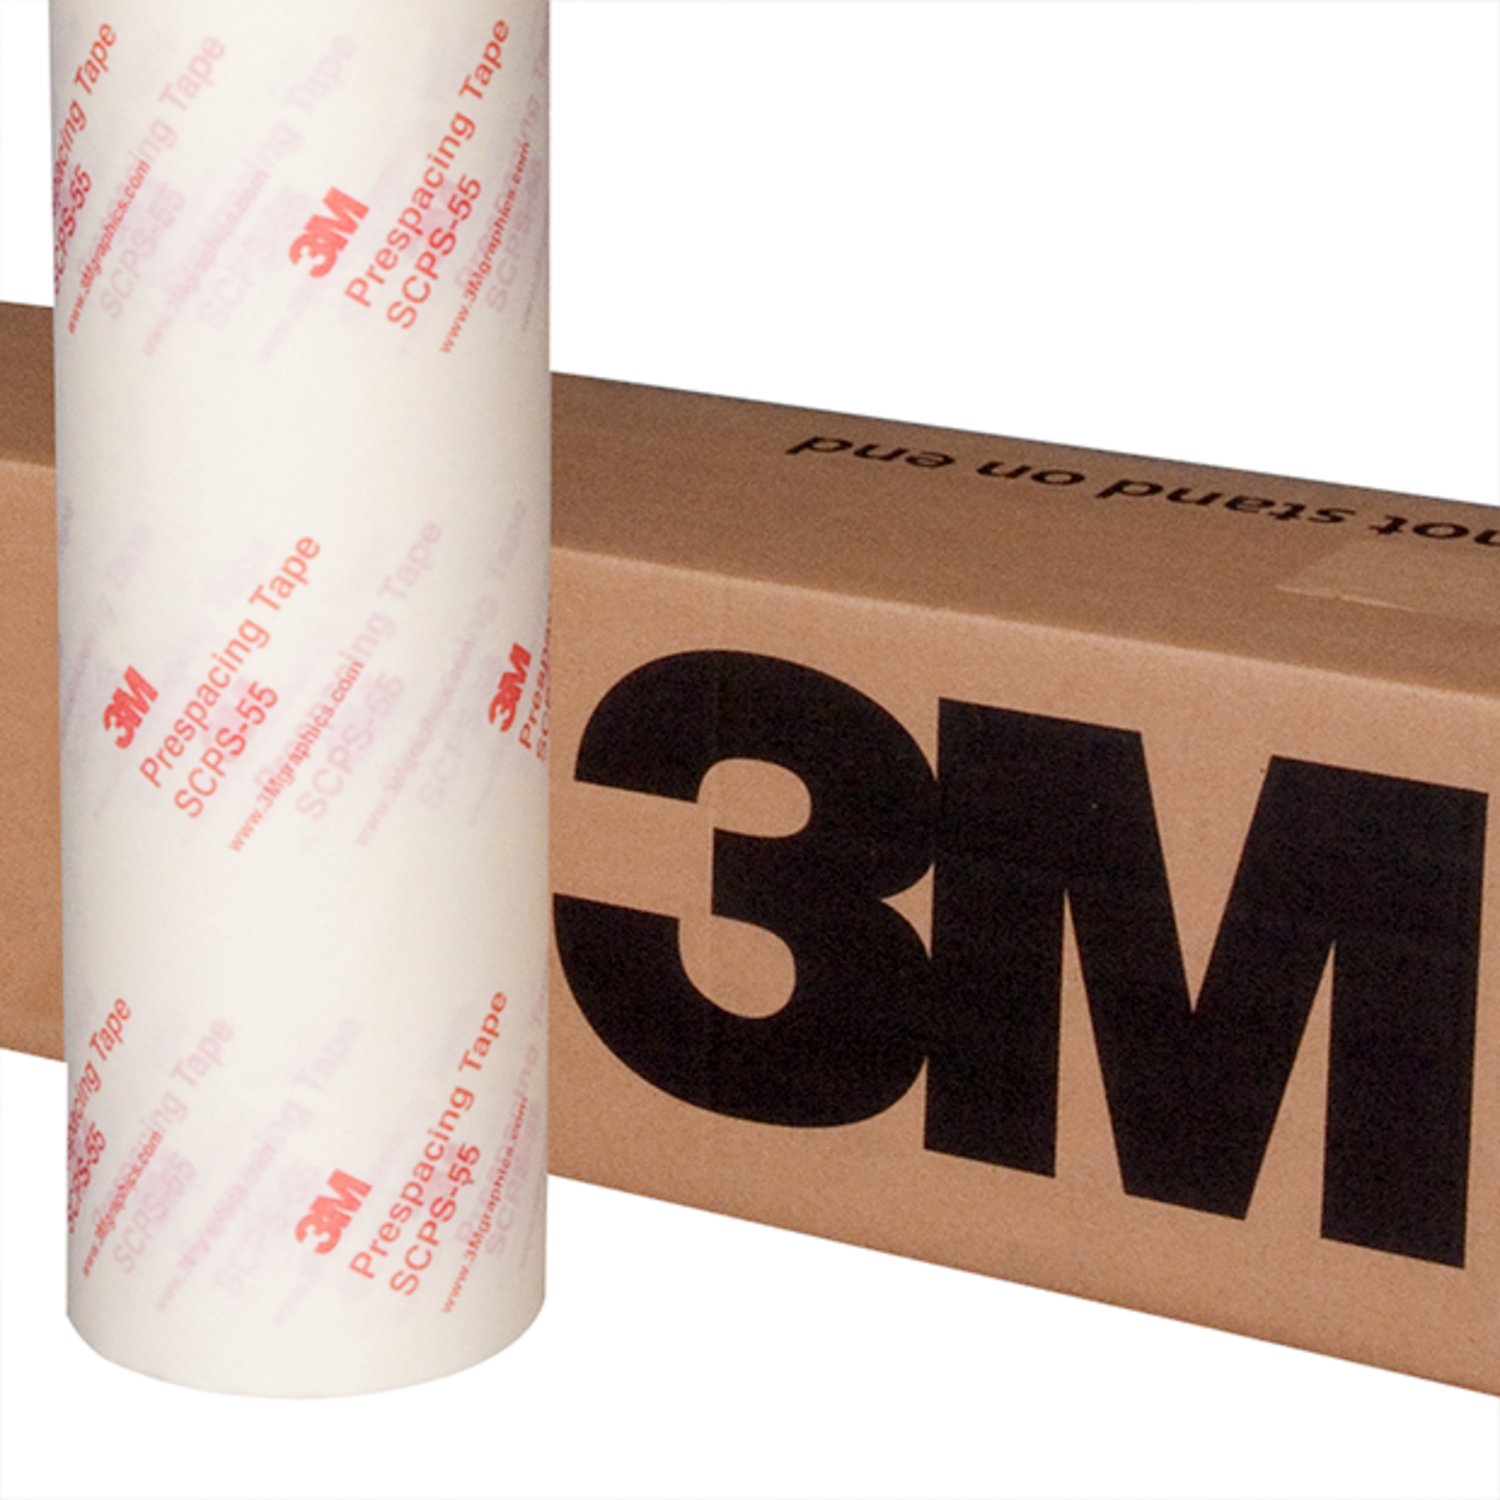 7000130300 - 3M Prespacing Tape SCPS-55, 60 in x 100 yd, 1 Roll/Case